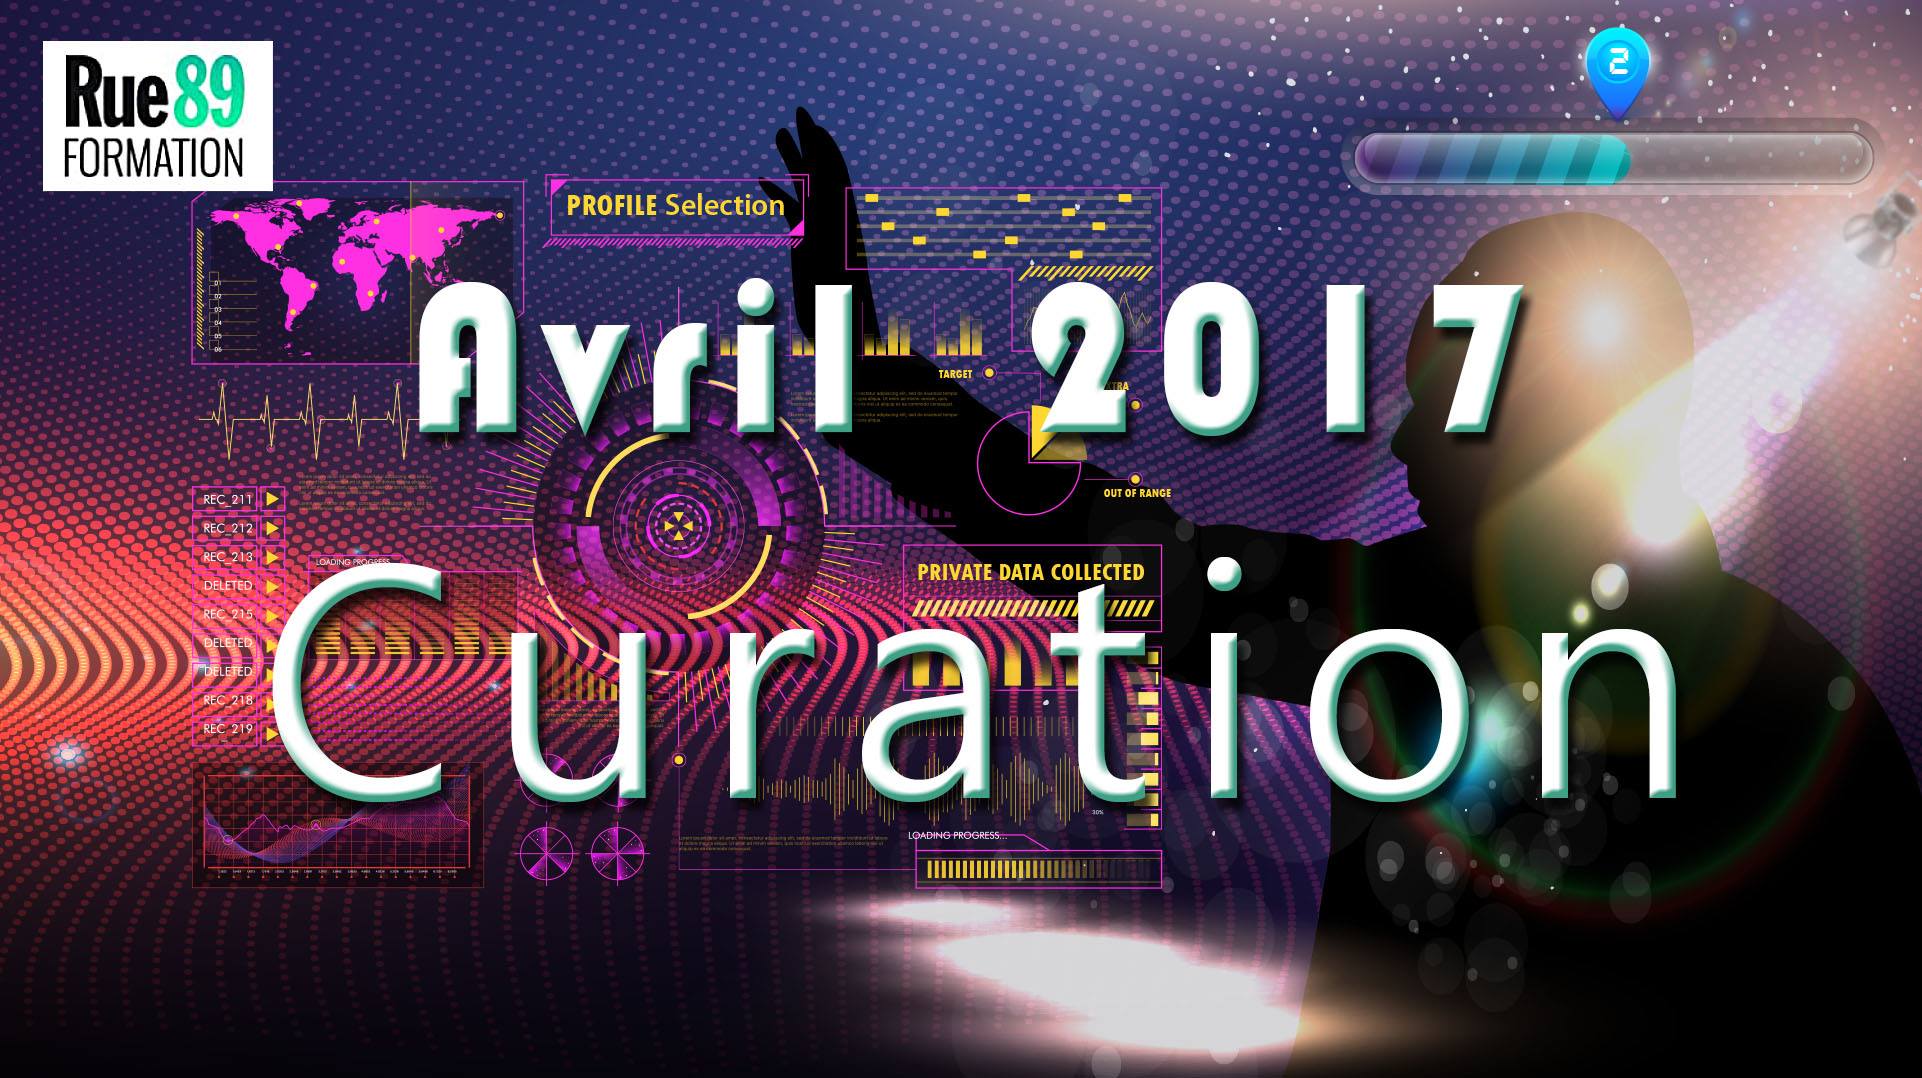 curation_ru89formation_avril_s2